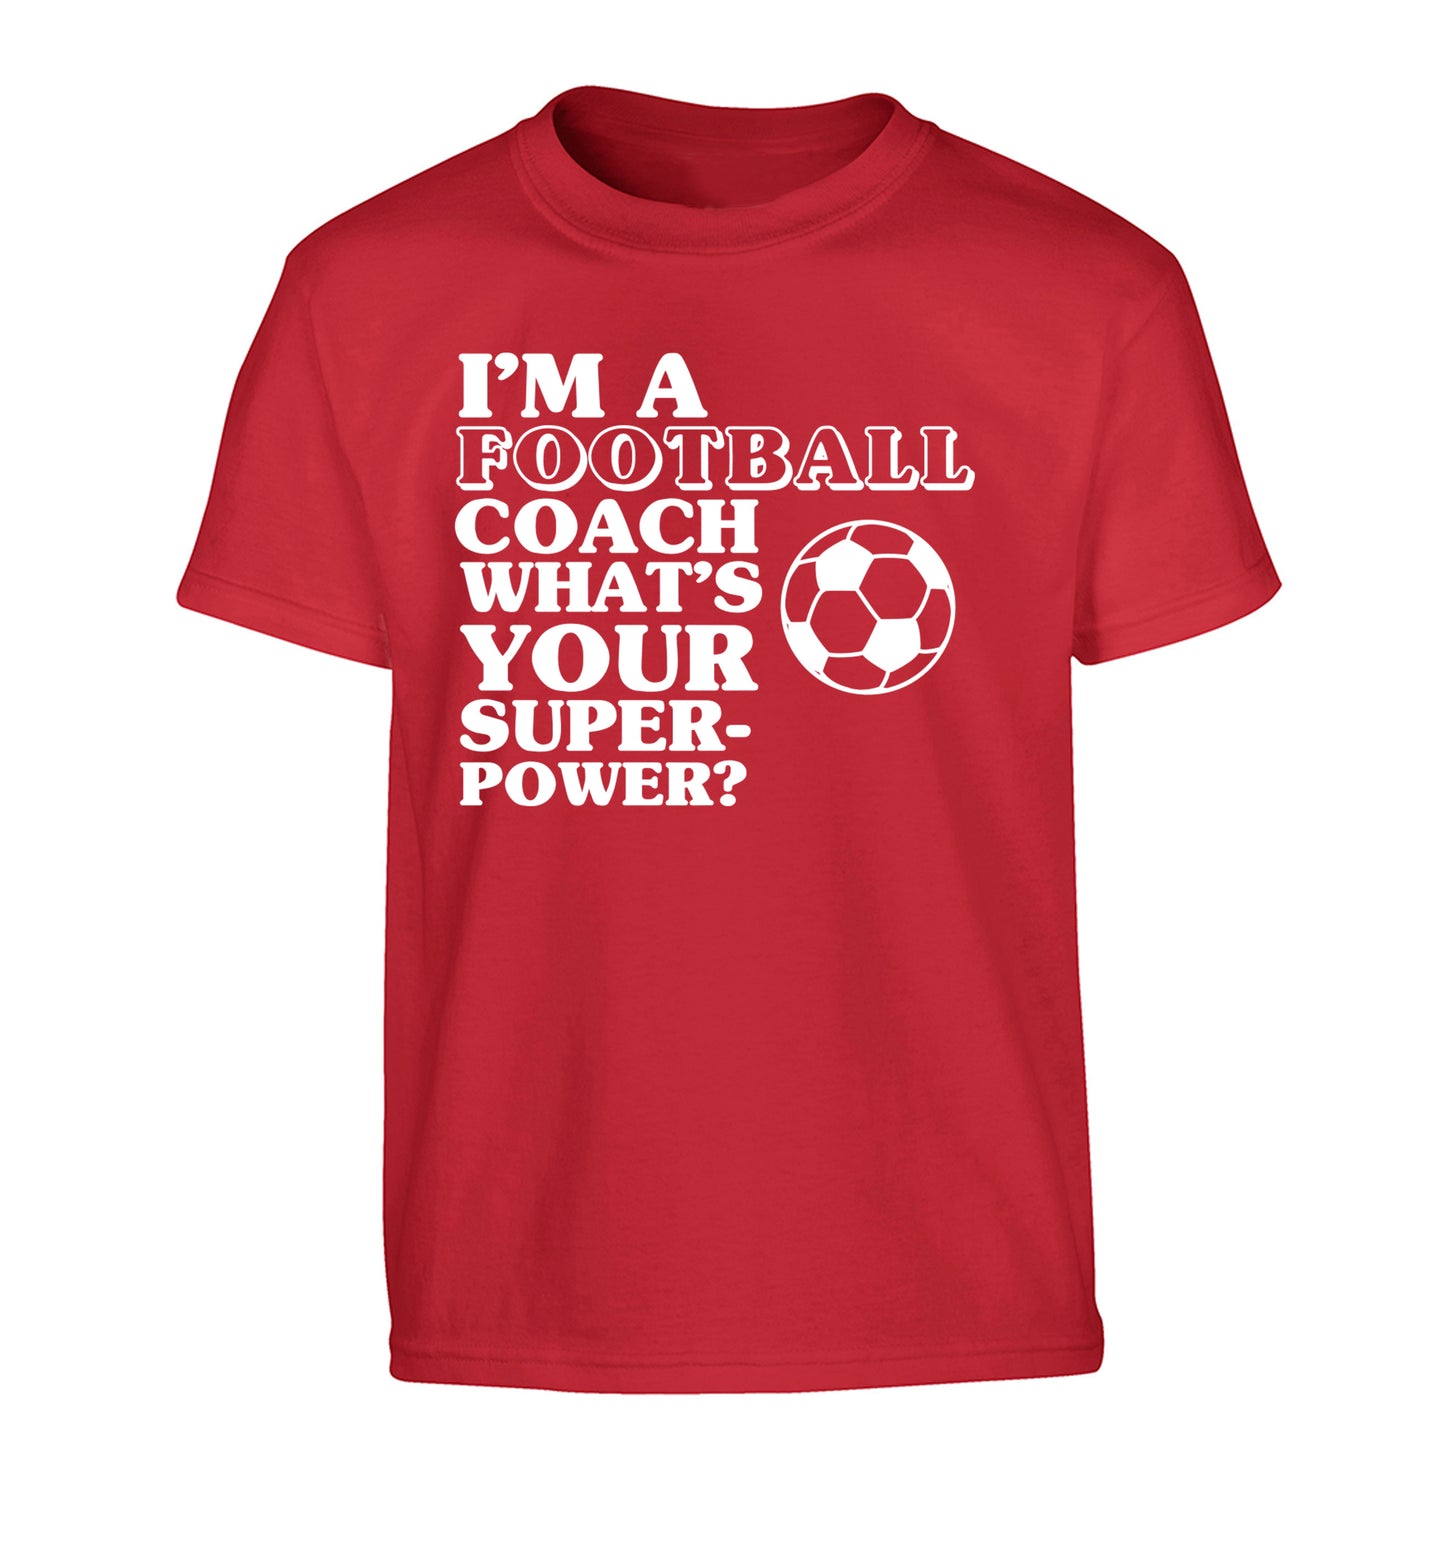 I'm a football coach what's your superpower? Children's red Tshirt 12-14 Years